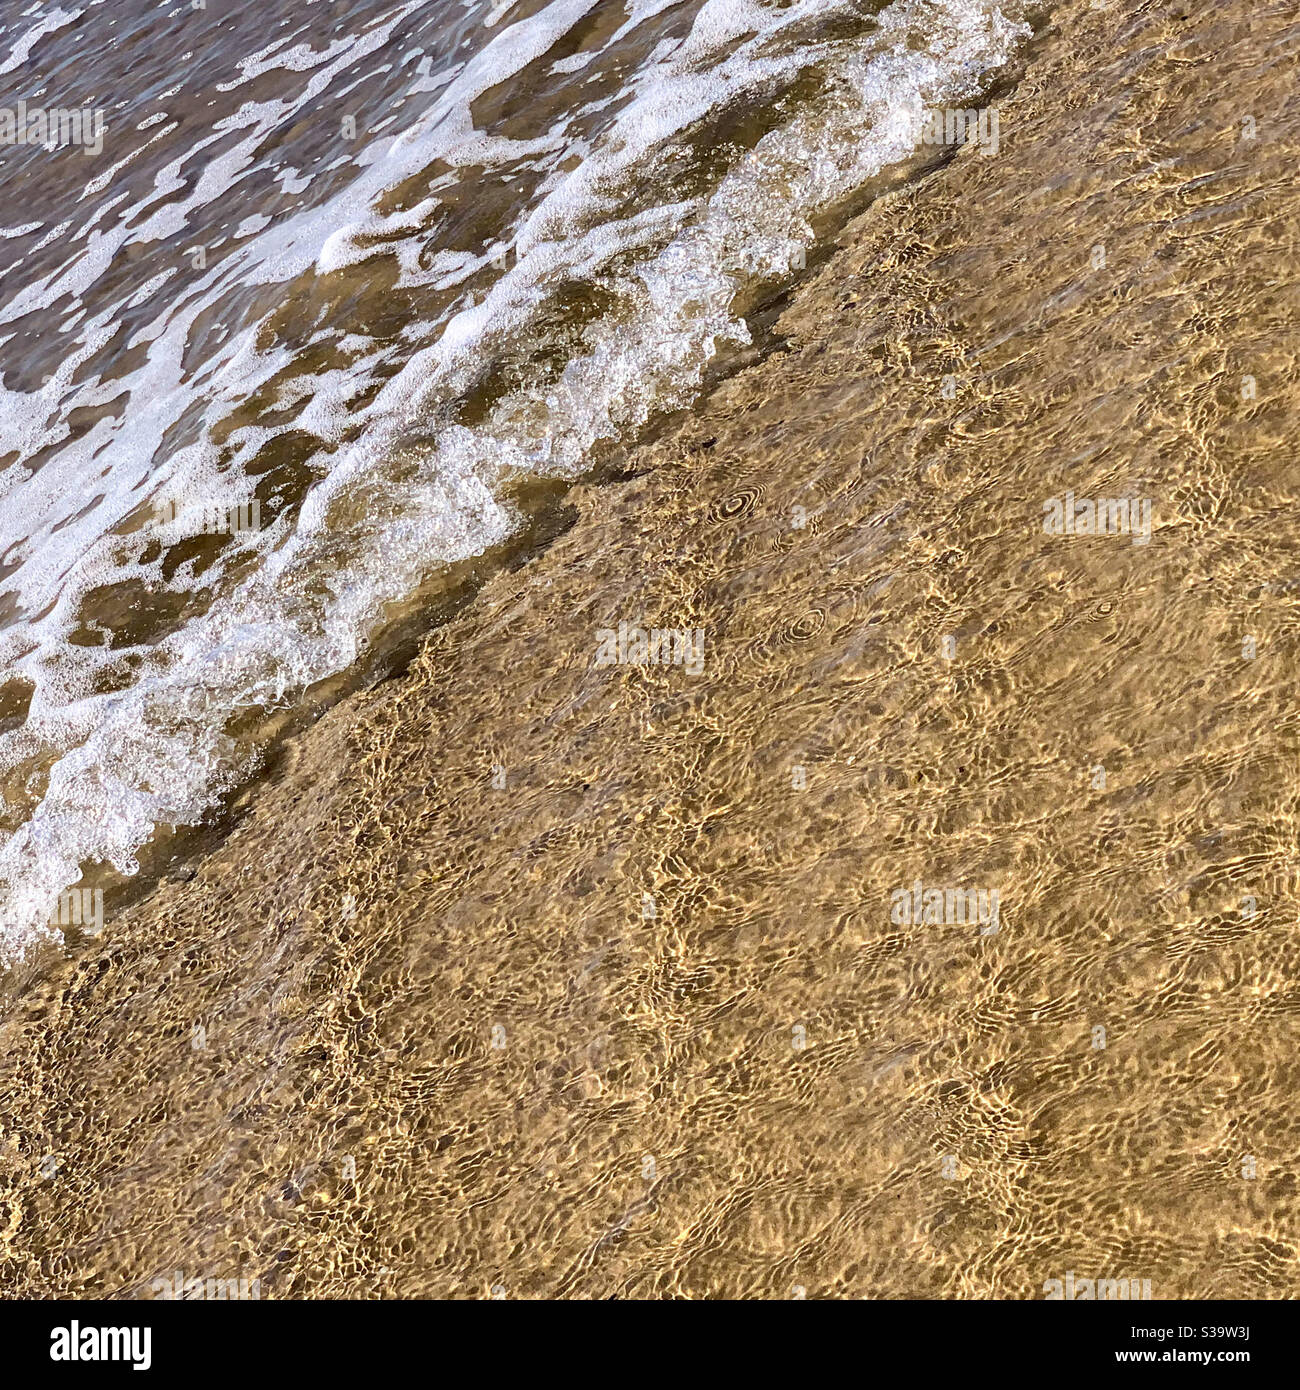 Patterns in the sand, sea water washing onto the beach, little waves making froth, diagonal perspective Stock Photo